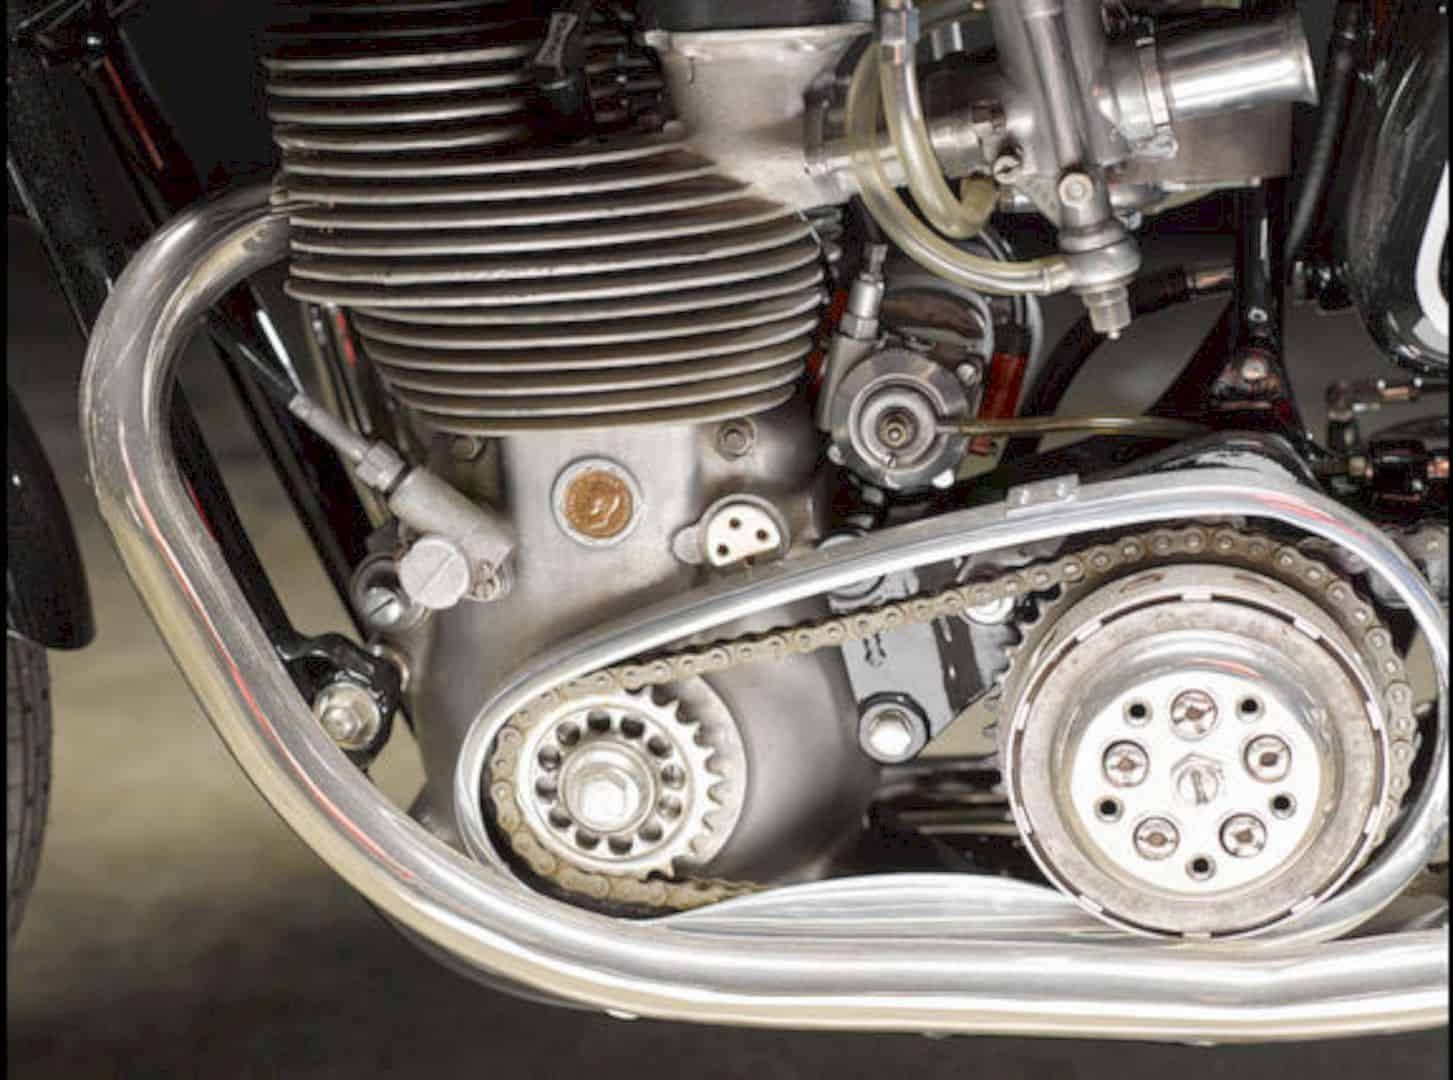 The 1955 Matchless 498cc G45 Motorcycle 6